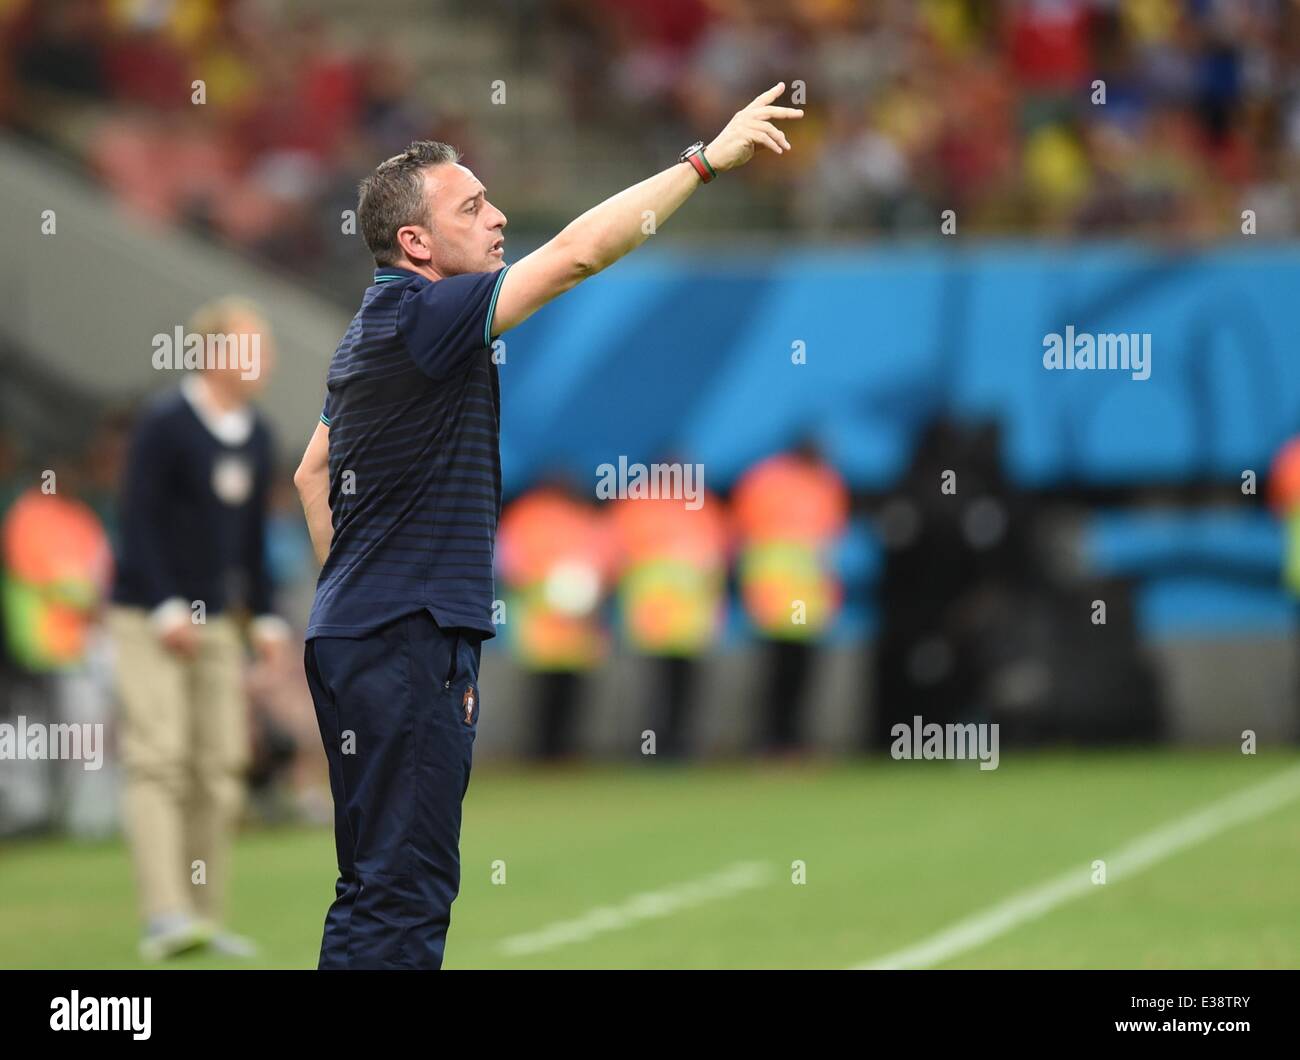 Manaus, Brazil. 22nd June, 2014. Head coach Paulo Bento (R) of Portugal reacts next to head coach Juergen Klinsmann (L) of USA during the FIFA World Cup 2014 group G preliminary round match between the USA and Portugal at the Arena Amazonia Stadium in Manaus, Brazil, 22 June 2014. Photo: Marius Becker/dpa/Alamy Live News Stock Photo